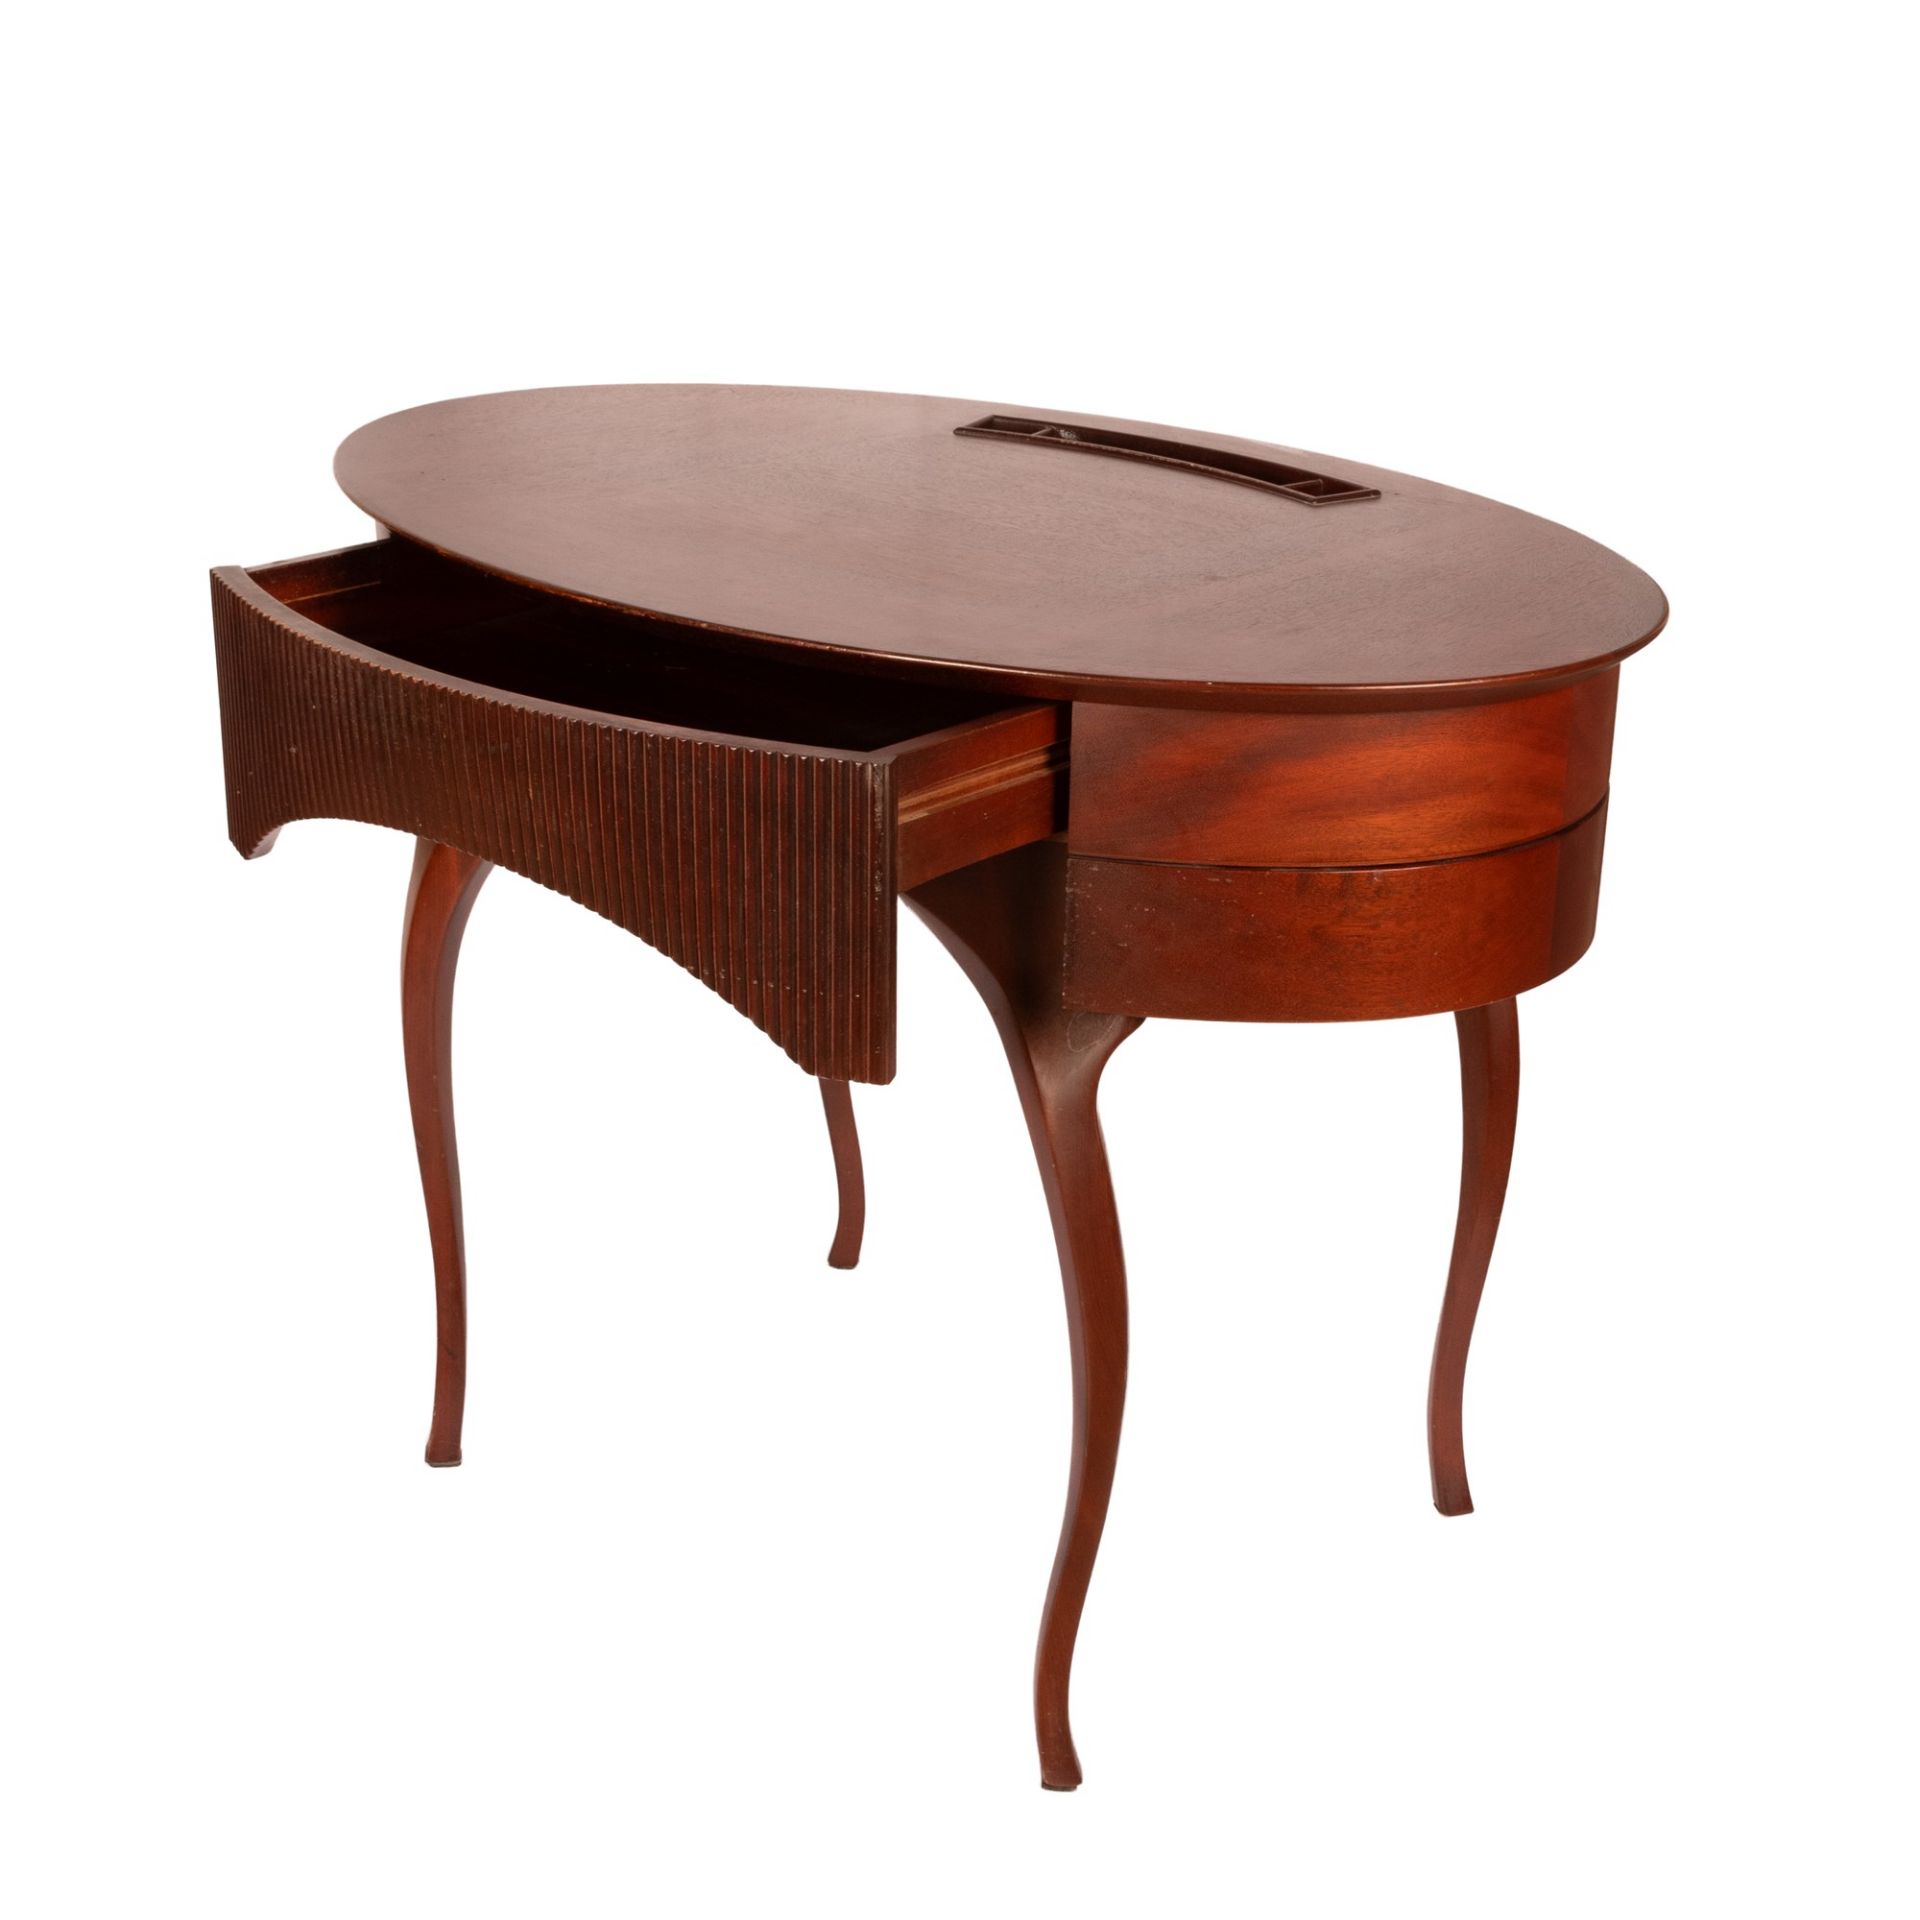 Writing desk in cherry wood - Image 5 of 25